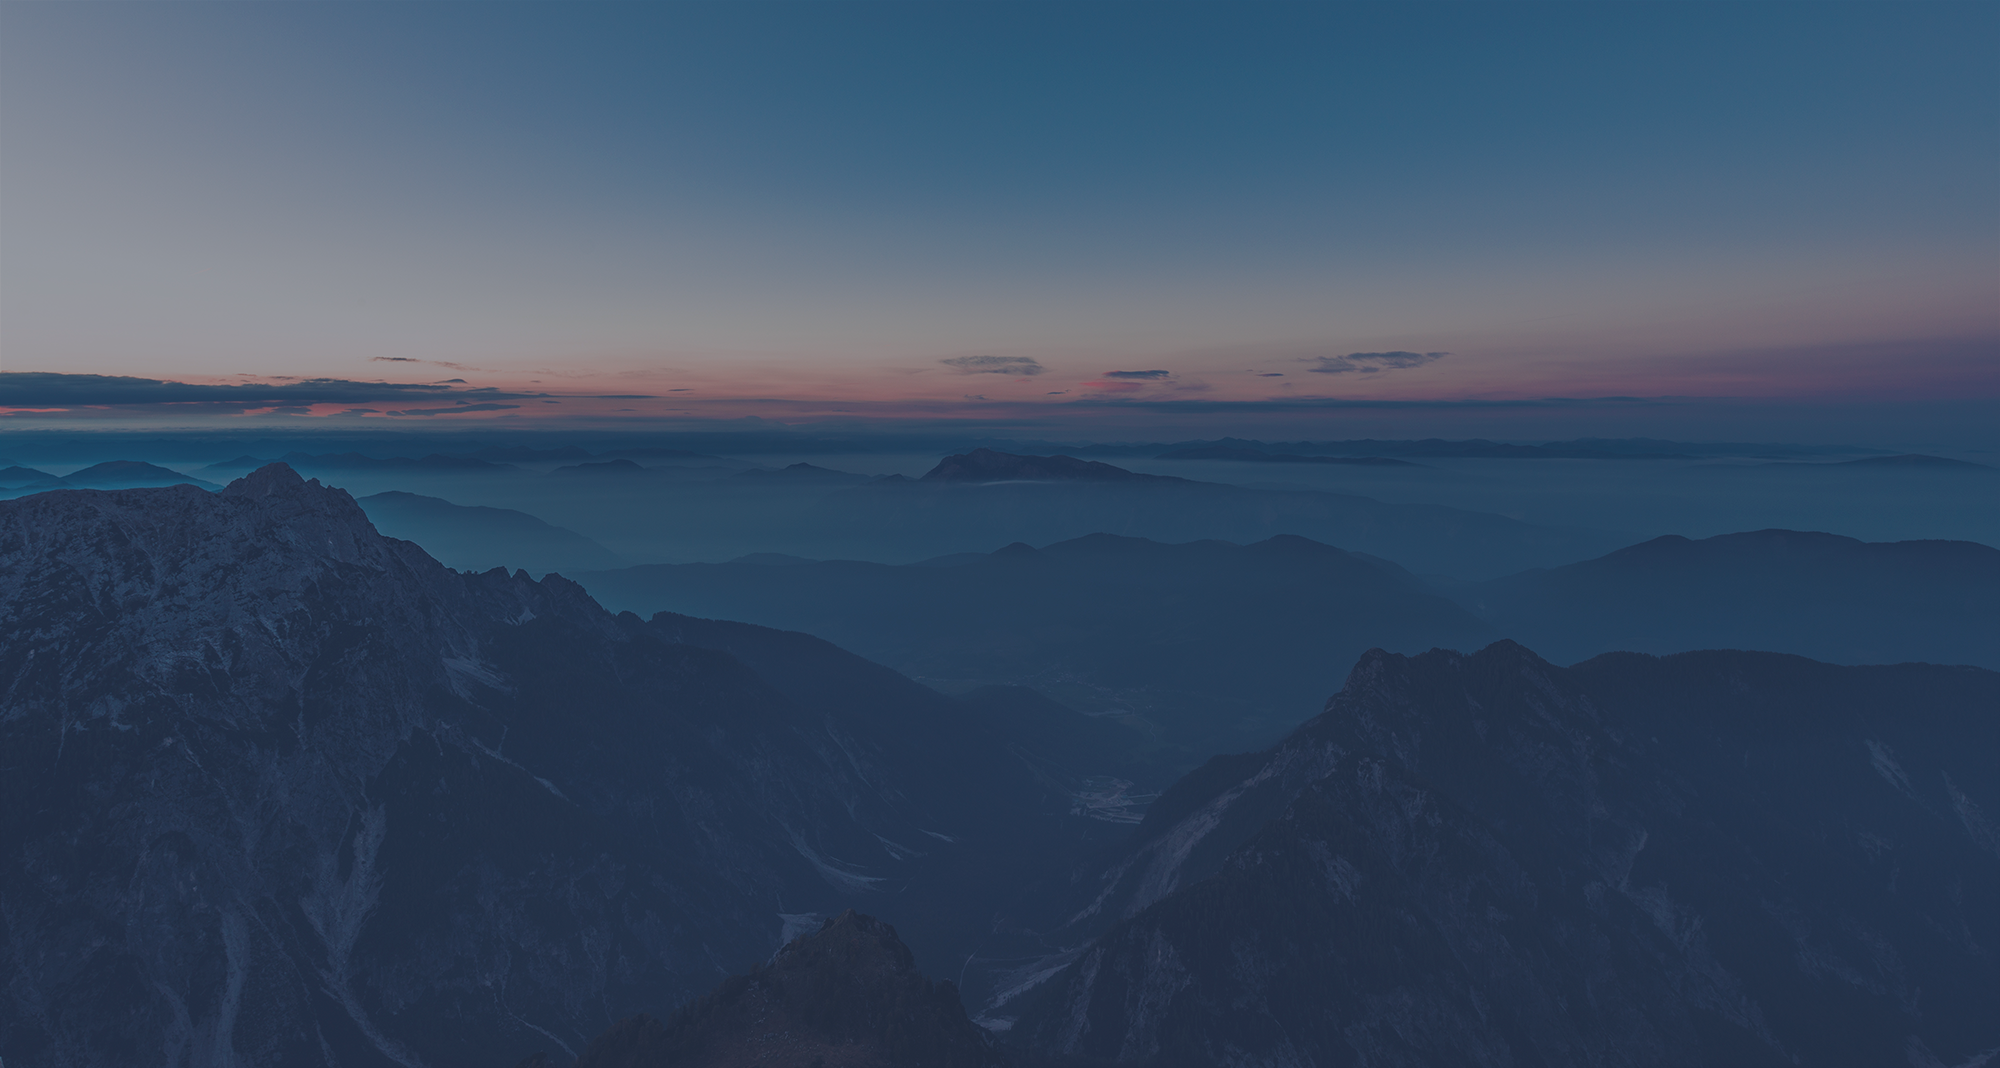 Background image which includes mountains with different tones of blue